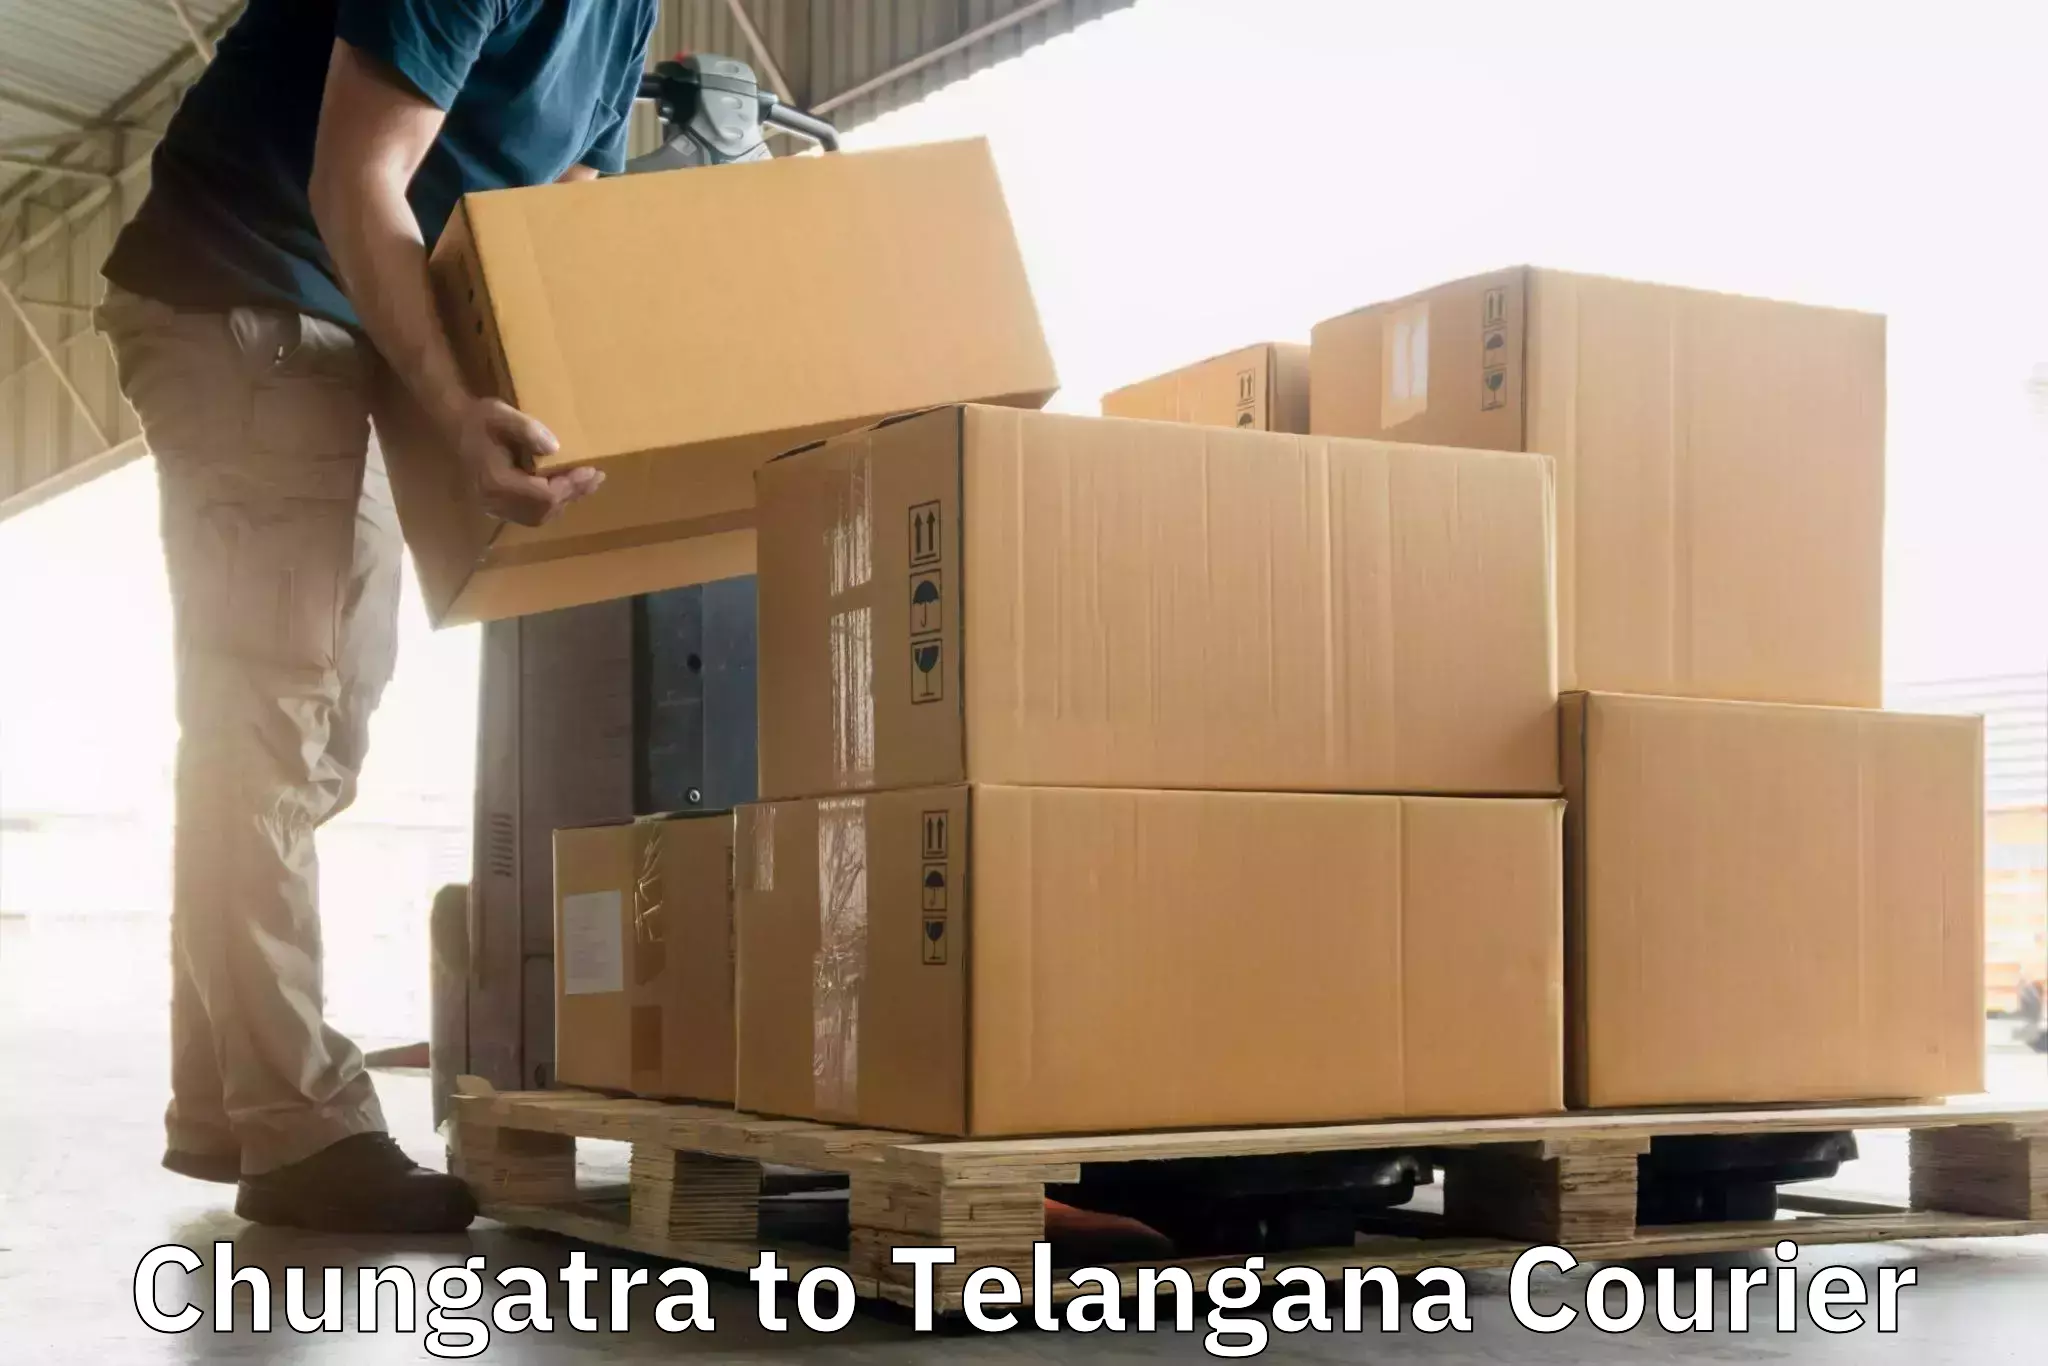 Express delivery network Chungatra to Metpally